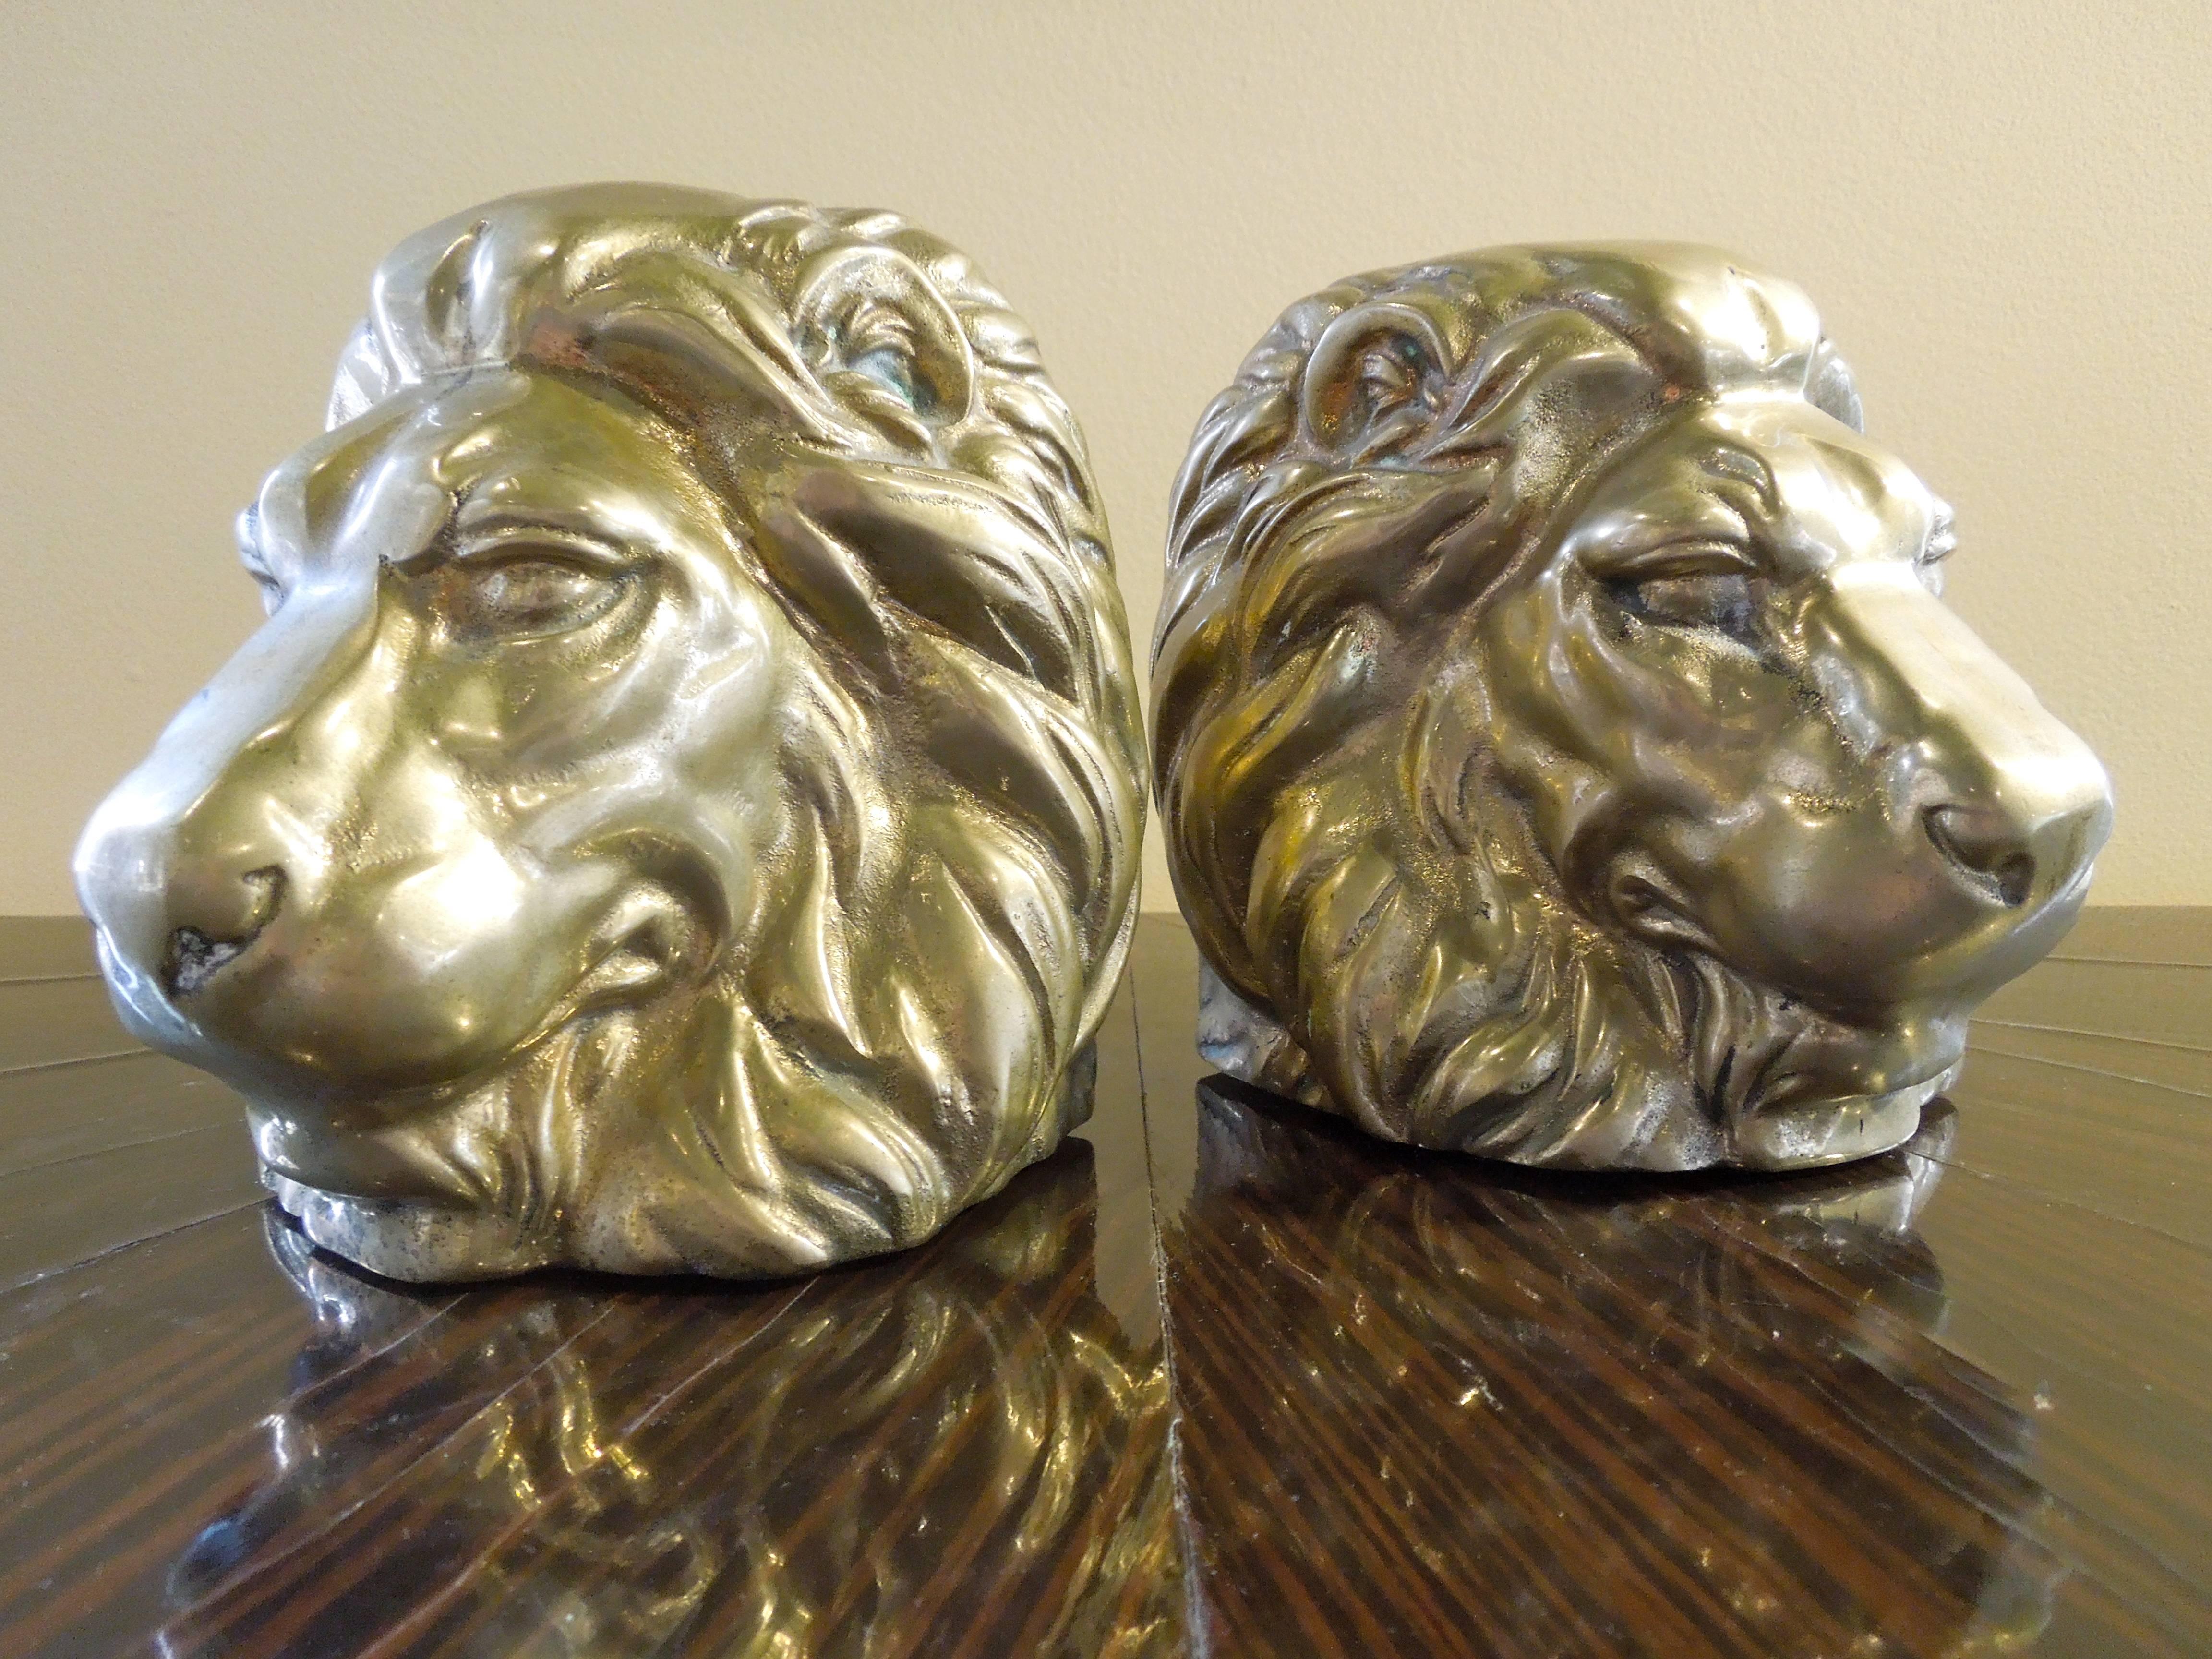 A very beautiful pair of bookends made of solid brass with the amazing detail of a lion's head. From a very upscale vintage Palm Springs estate.